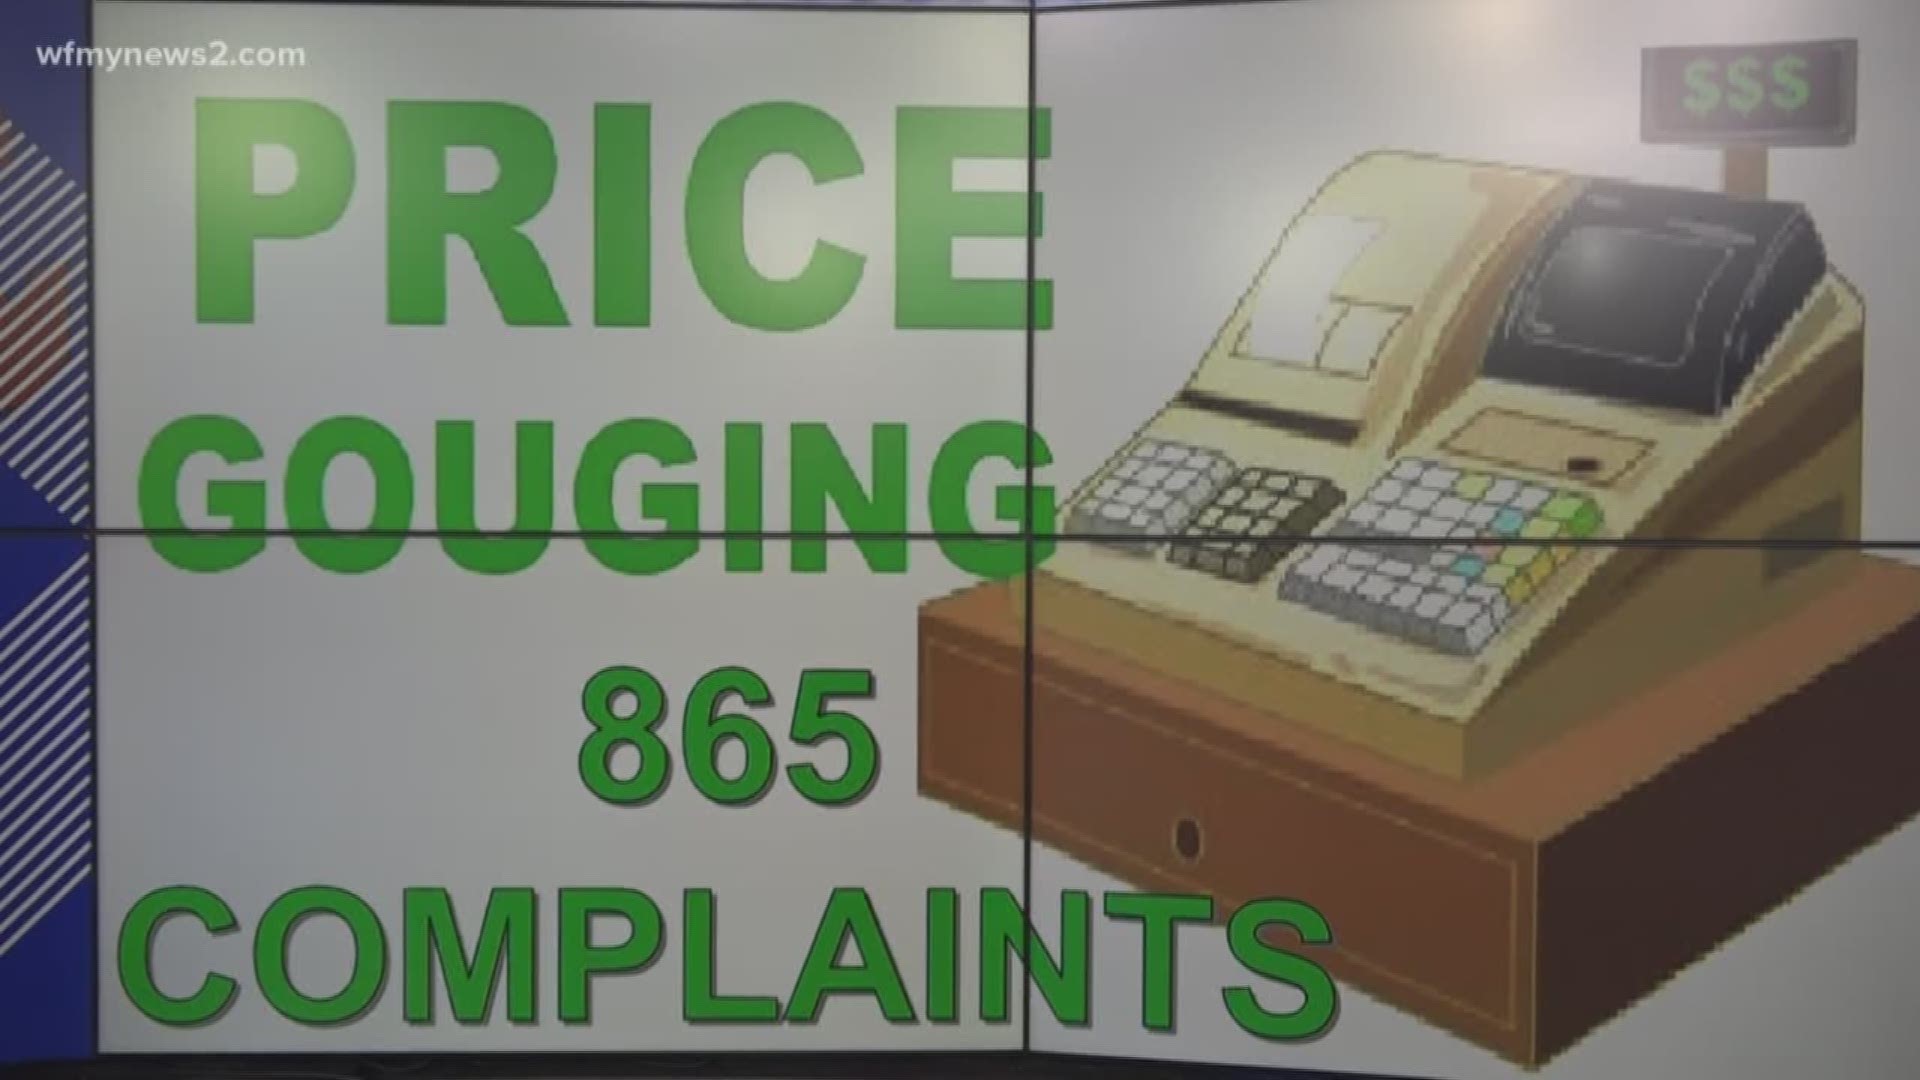 In the past three weeks, the state attorney generals office has received nearly 865 price gouging complaints.